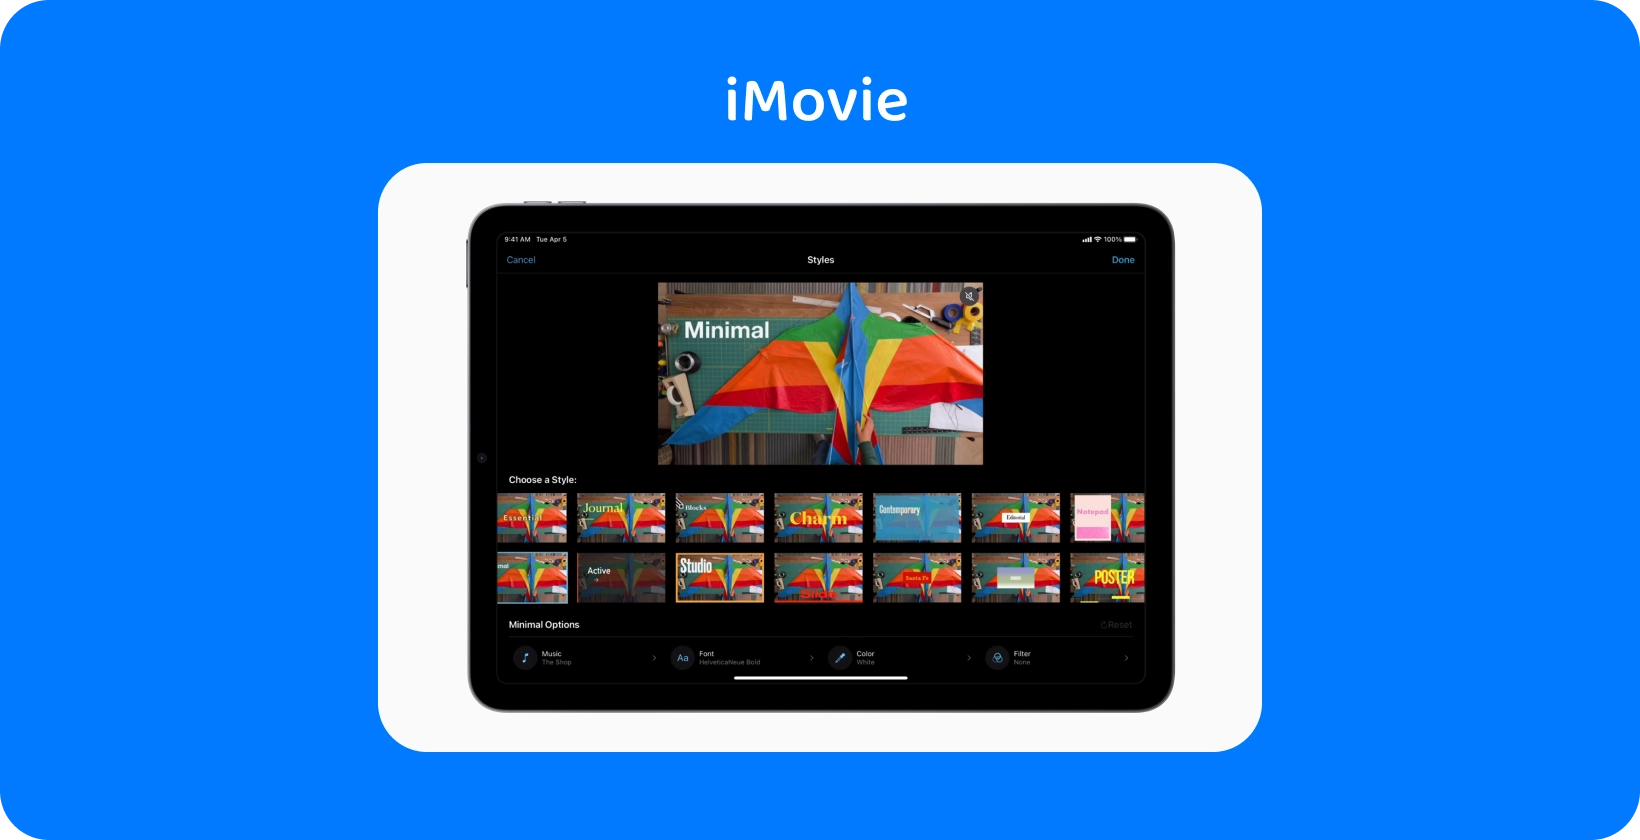 iMovie on a tablet displaying various video editing styles, with a colorful kite project set to the 'Minimal' theme.